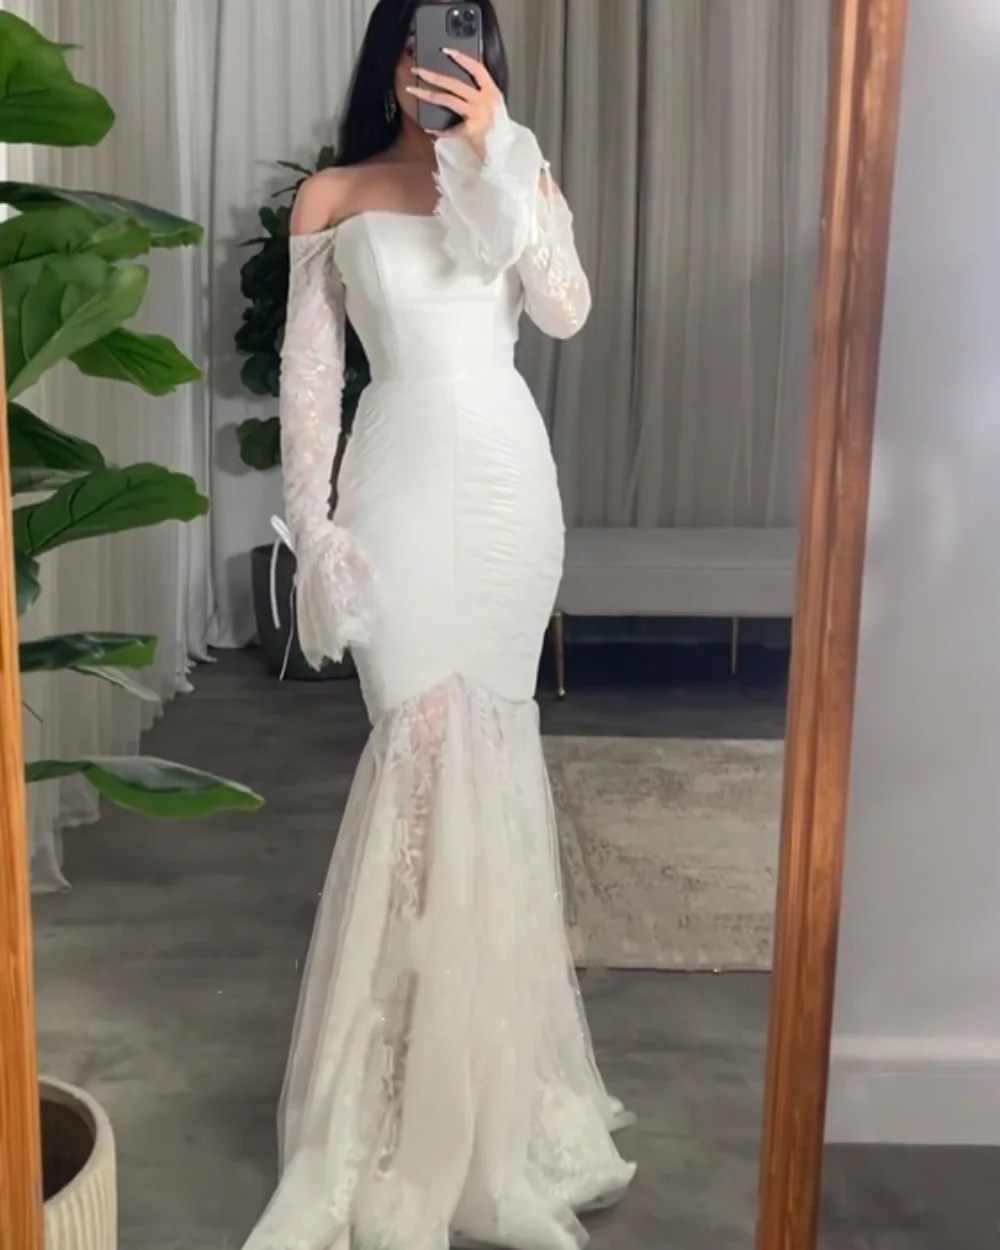 Tulle Ribbons Quinceanera Trumpet Boat Neck Bespoke Occasion Gown Long Dresses mariage champetre free shipping 2021 bandage maxi long white crystal cute tulle civil war formal bespoke wedding dresses